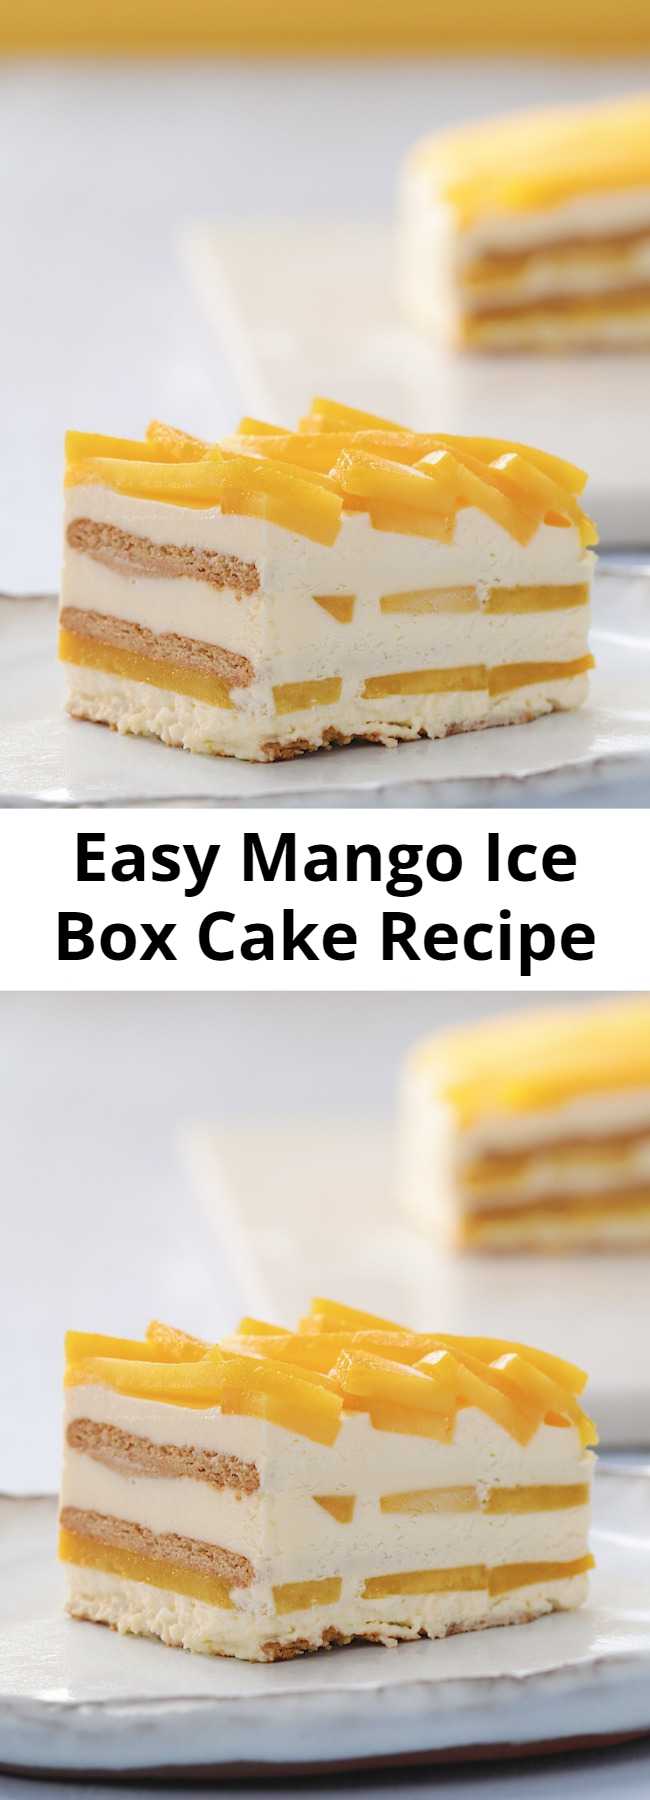 Mango Ice Box Cake Recipe - This mango icebox cake is a Summer family classic! the layers of juicy fresh mango are sure to keep you refreshed!